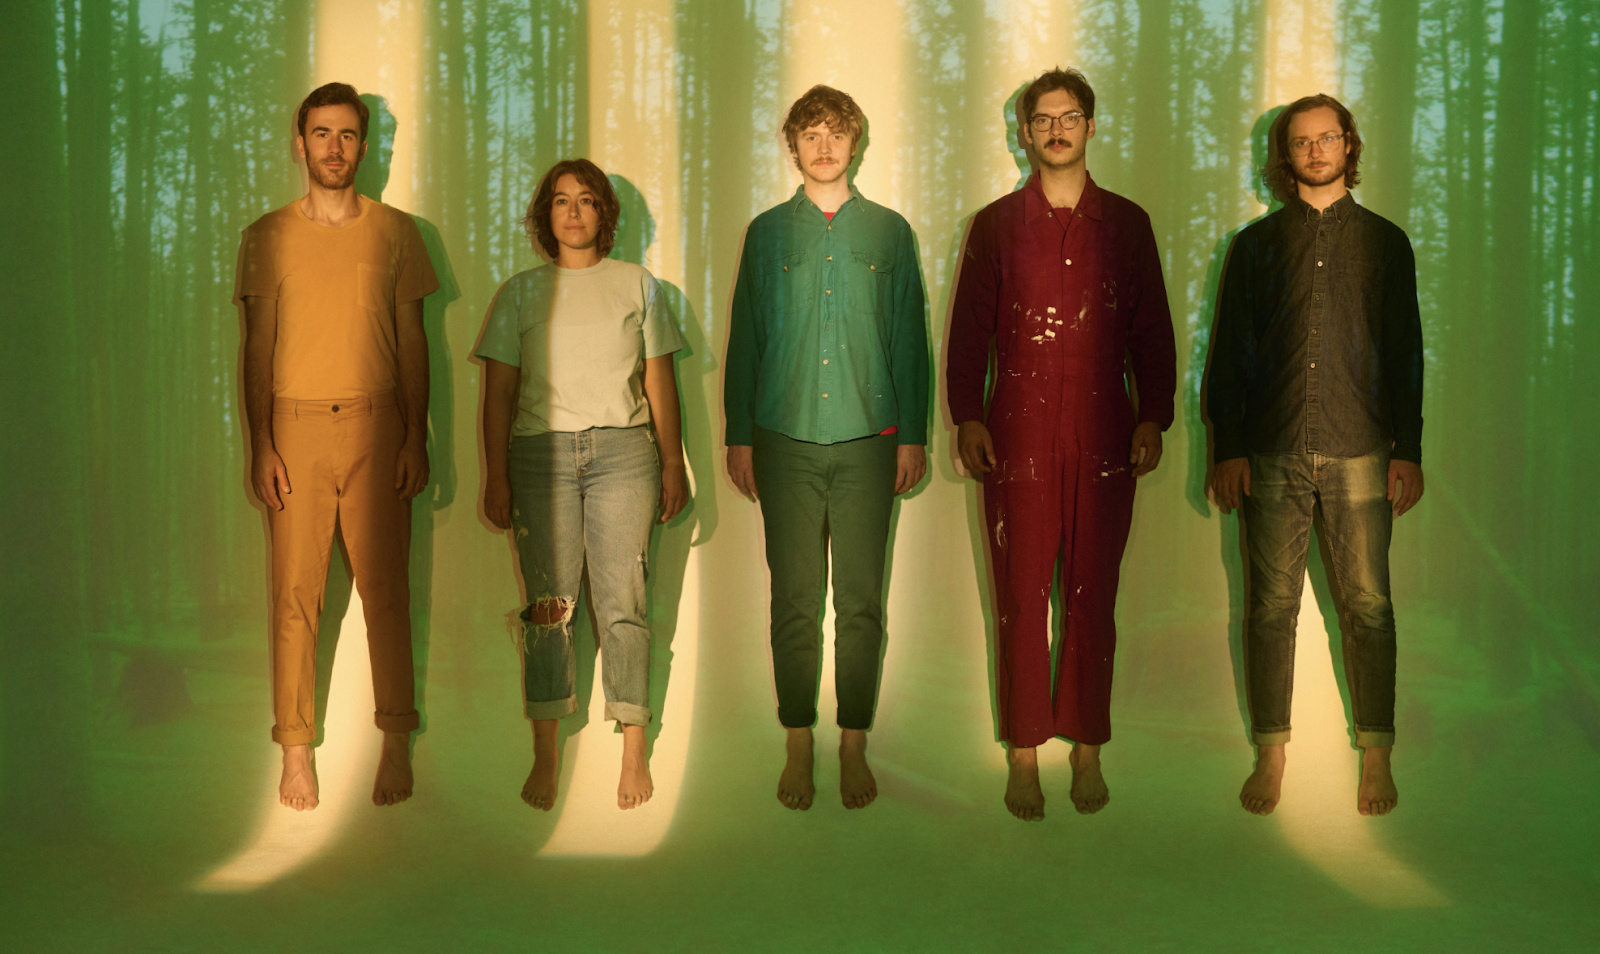 The five members of Pinegrove stand, directly facing the camera, against a wall with a forest projected upon it.